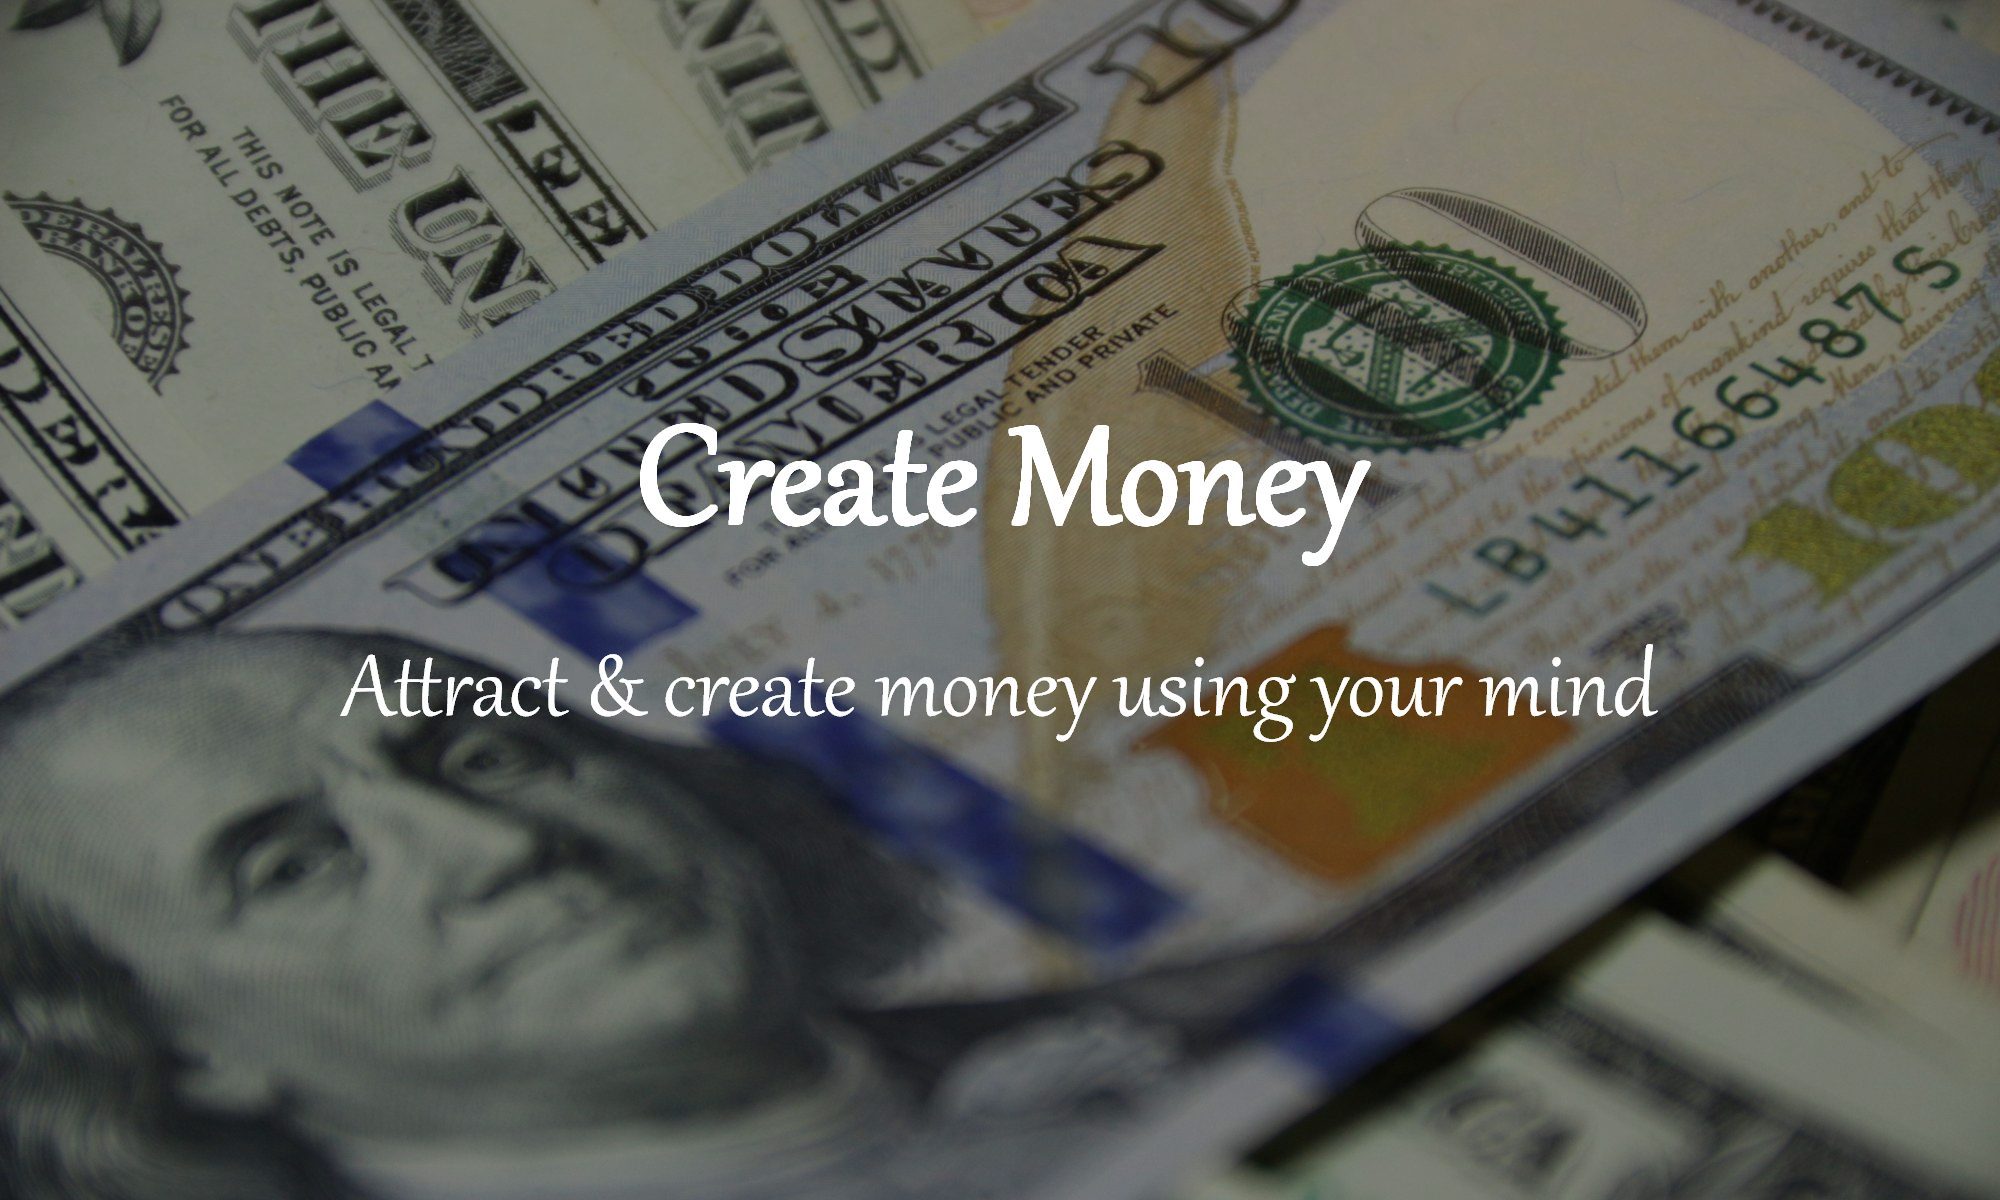 Attract Money Using Your Mind: How Do I Use My Mind to Create Money?